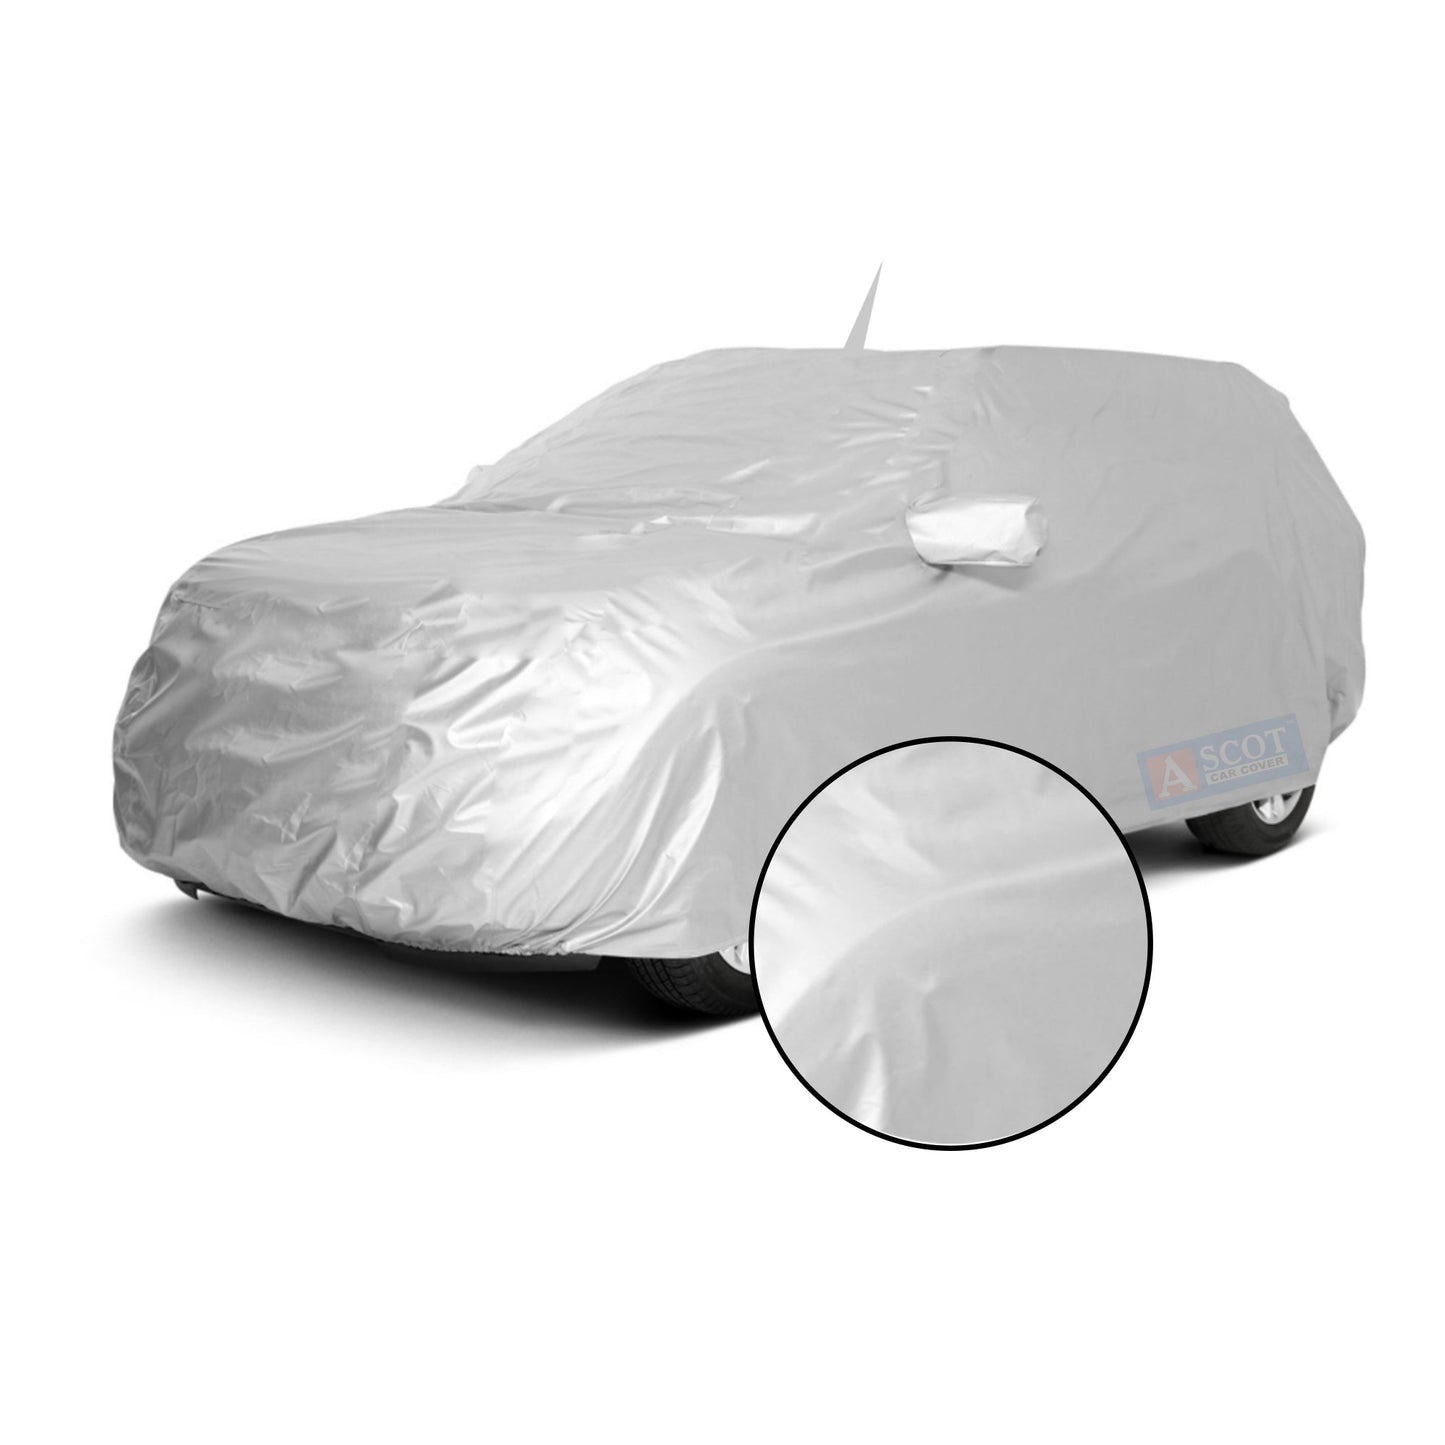 Ascot Ford Freestyle Car Body Cover Dust Proof, Trippel Stitched